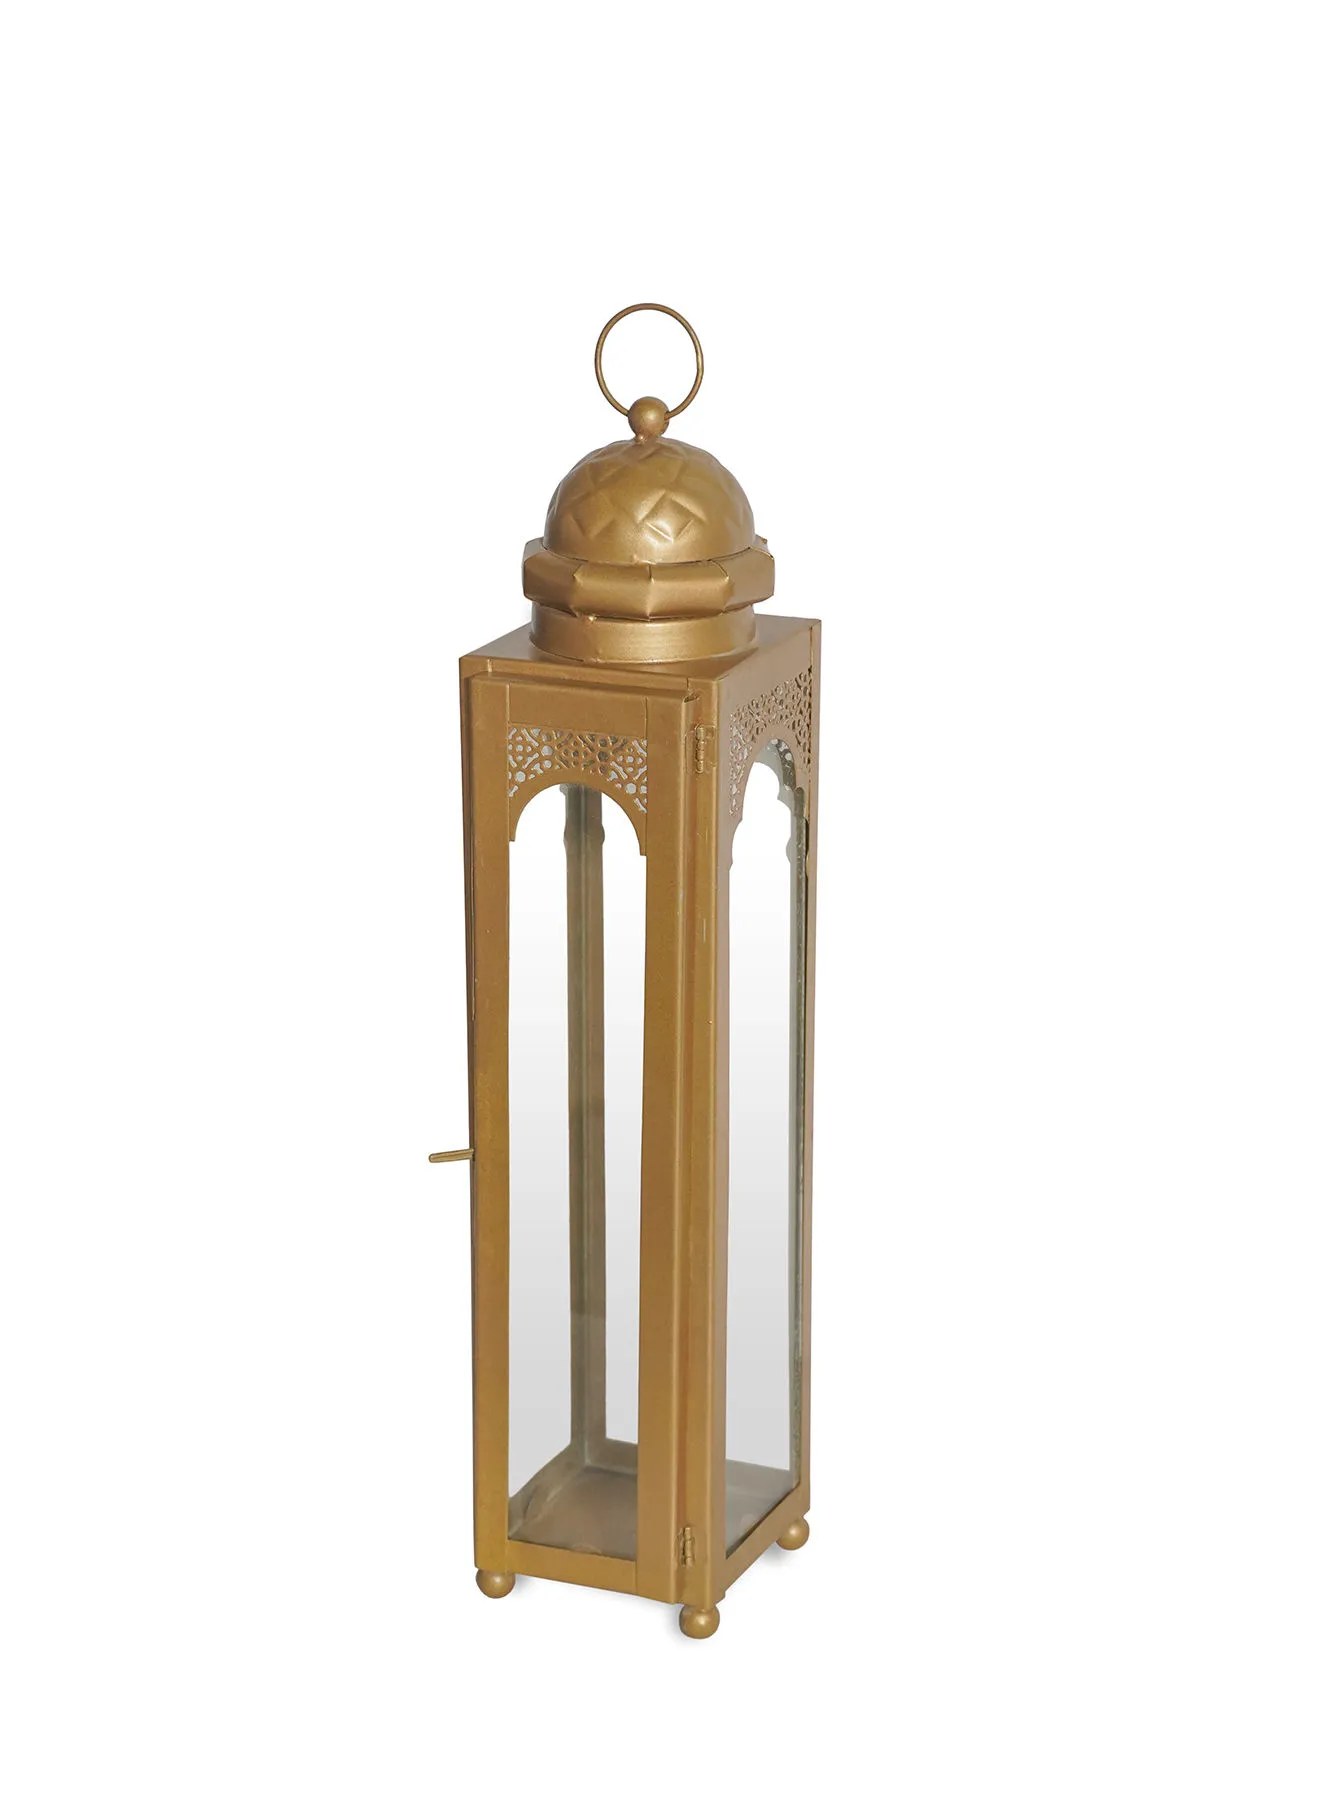 ebb & flow Modern Ideal Design Handmade Lantern Unique Luxury Quality Scents For The Perfect Stylish Home Gold 7.42X7.42X40centimeter